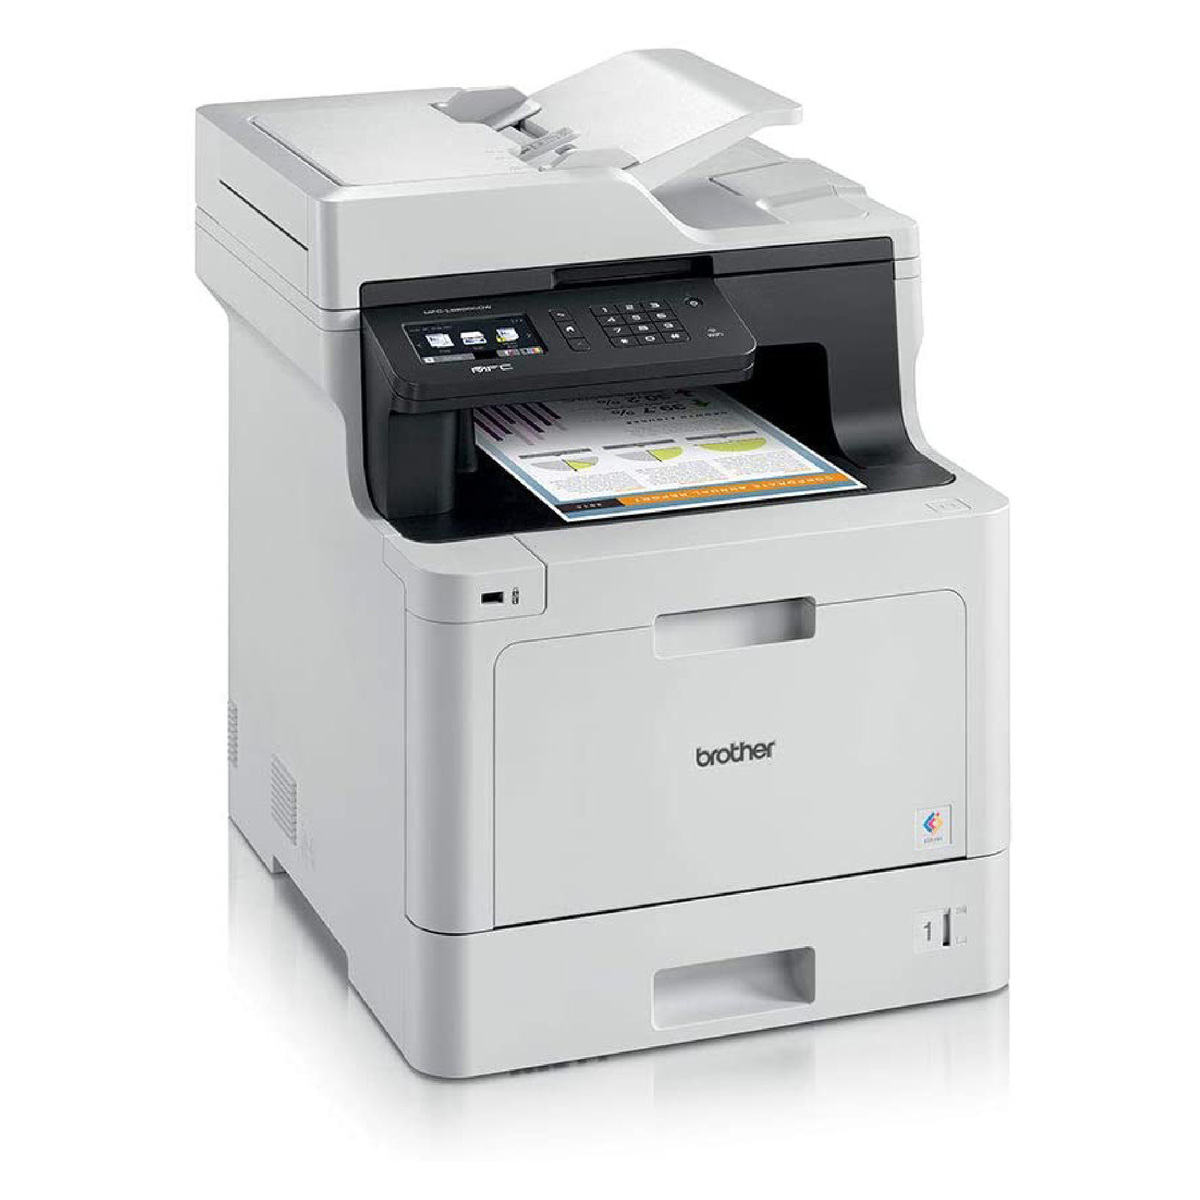 Brother MFC-L8690CDW Colour Laser Multi-function Printer